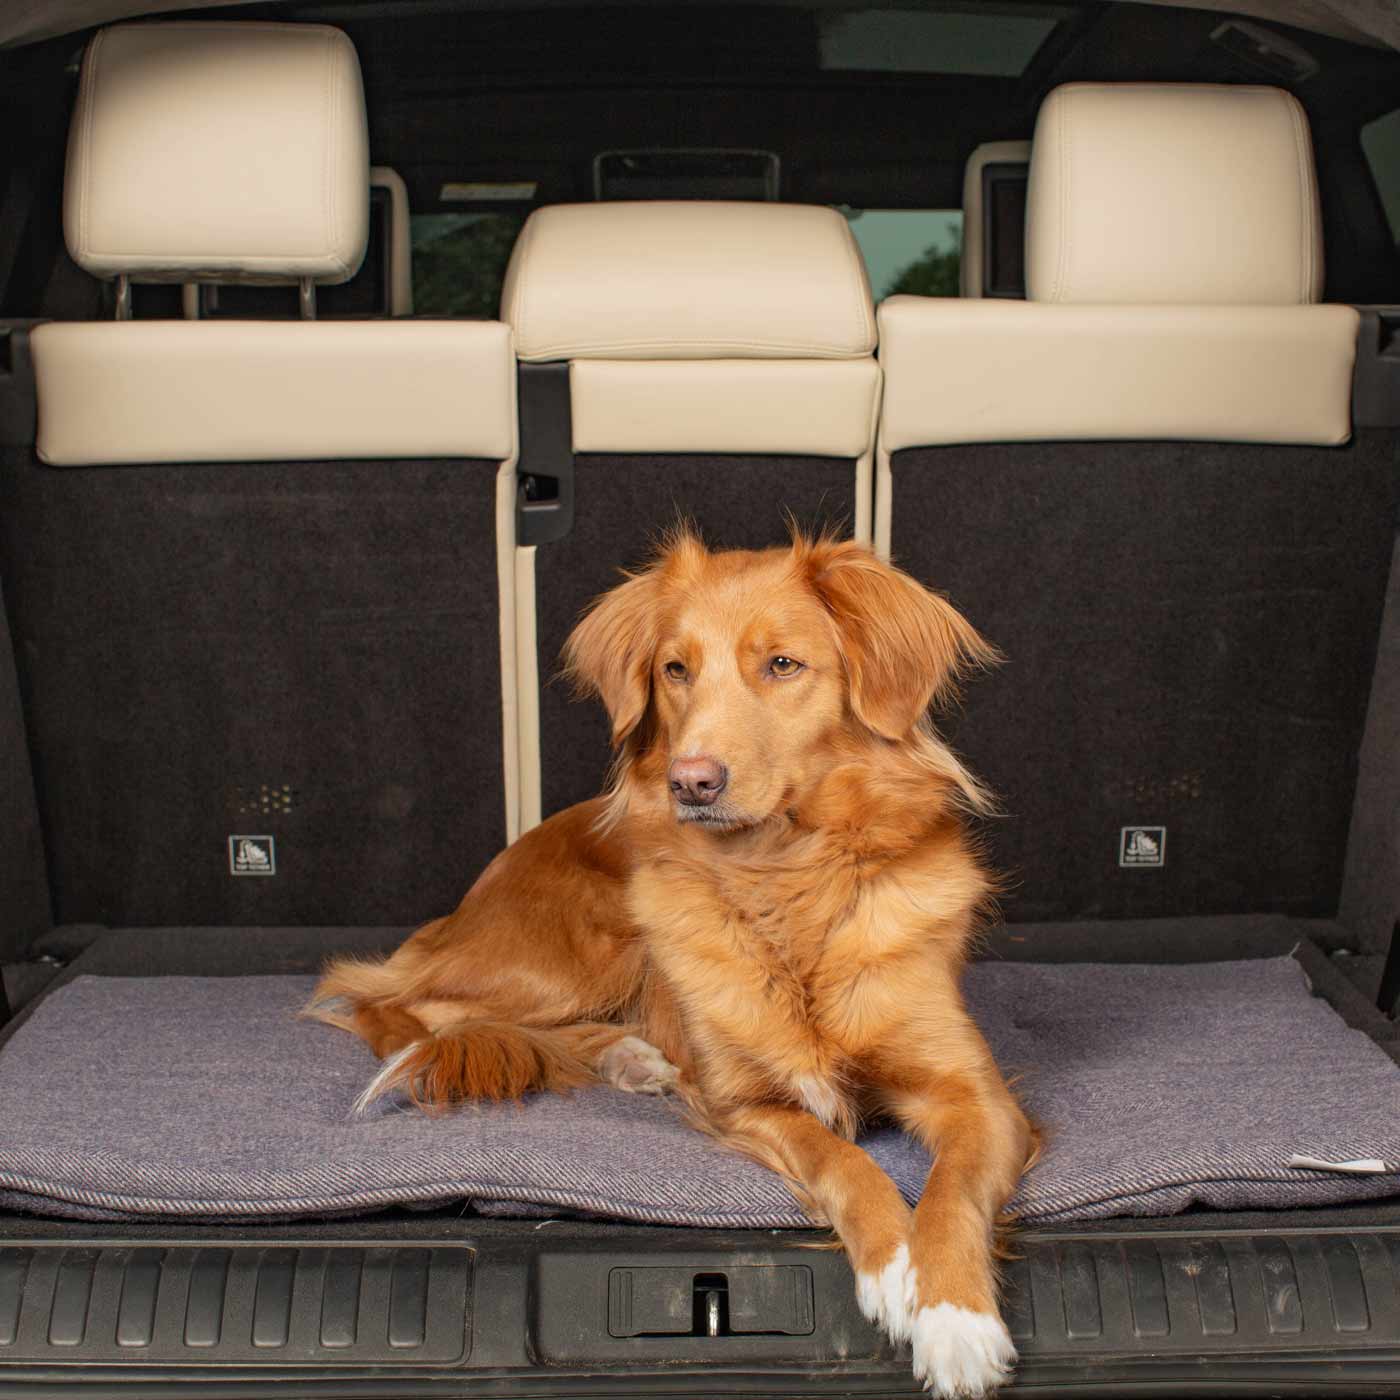 Embark on the perfect pet travel with our luxury Travel Mat in Oxford Herringbone. Featuring a Carry handle for on the move once Rolled up for easy storage, can be used as a seat cover, boot mat or travel bed! Available now at Lords & Labradors US